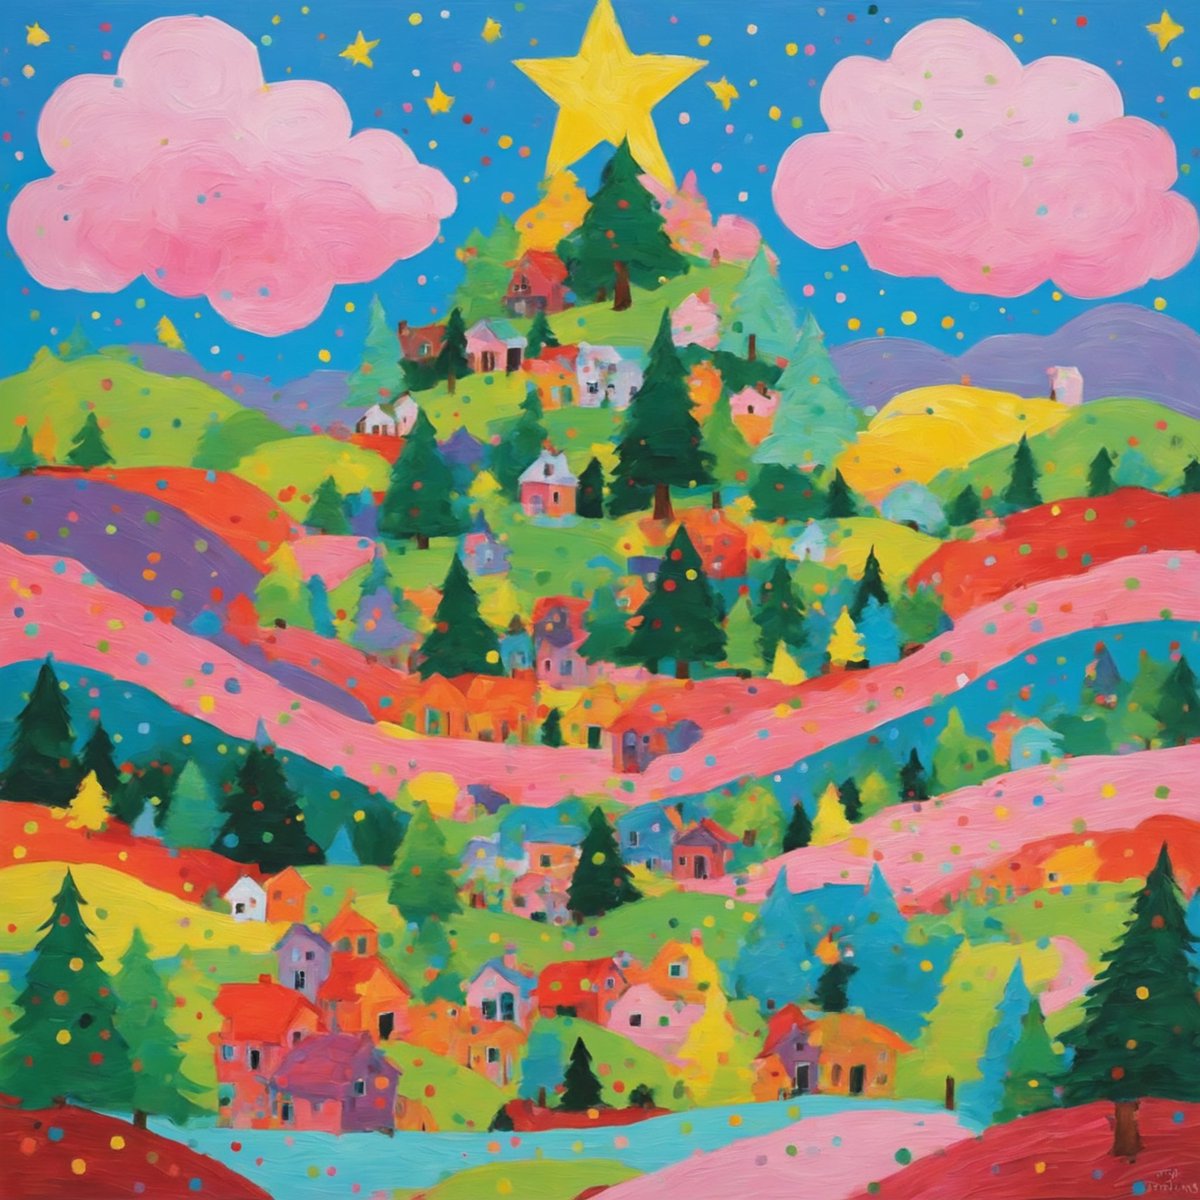 A festive dreamscape that sparkles with joy, this vibrant tableau celebrates the whimsical heart of the holiday spirit. #FestiveArt #HolidayCheer #ColorfulCreativity